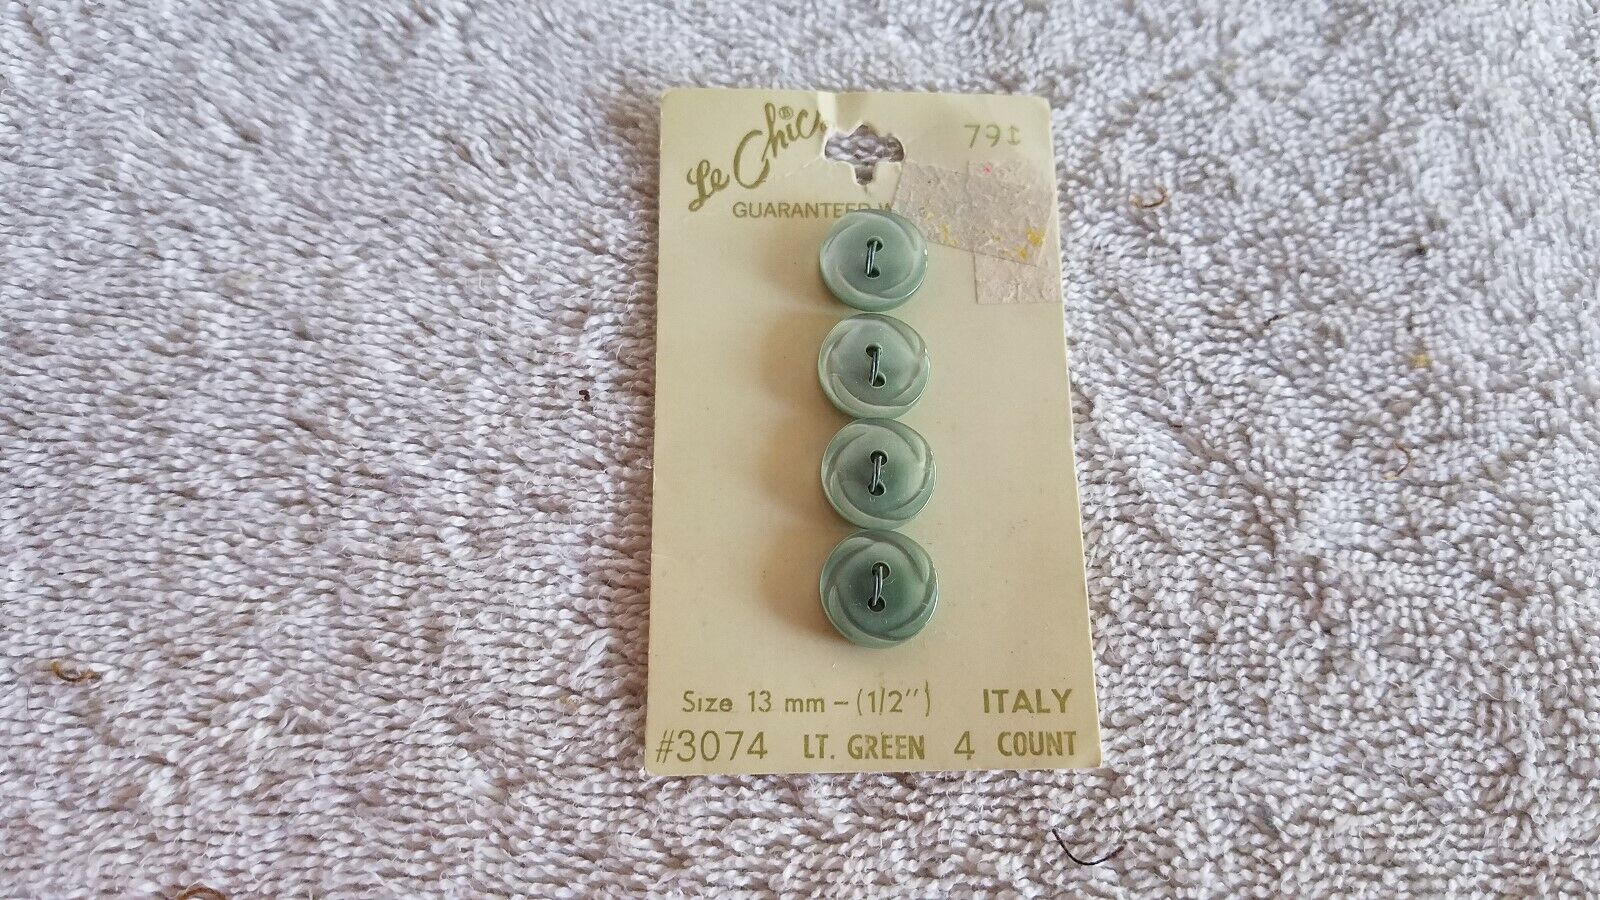 NOS Vintage Le Chic Lt. Green 3074 Buttons Italy Size 1/2\